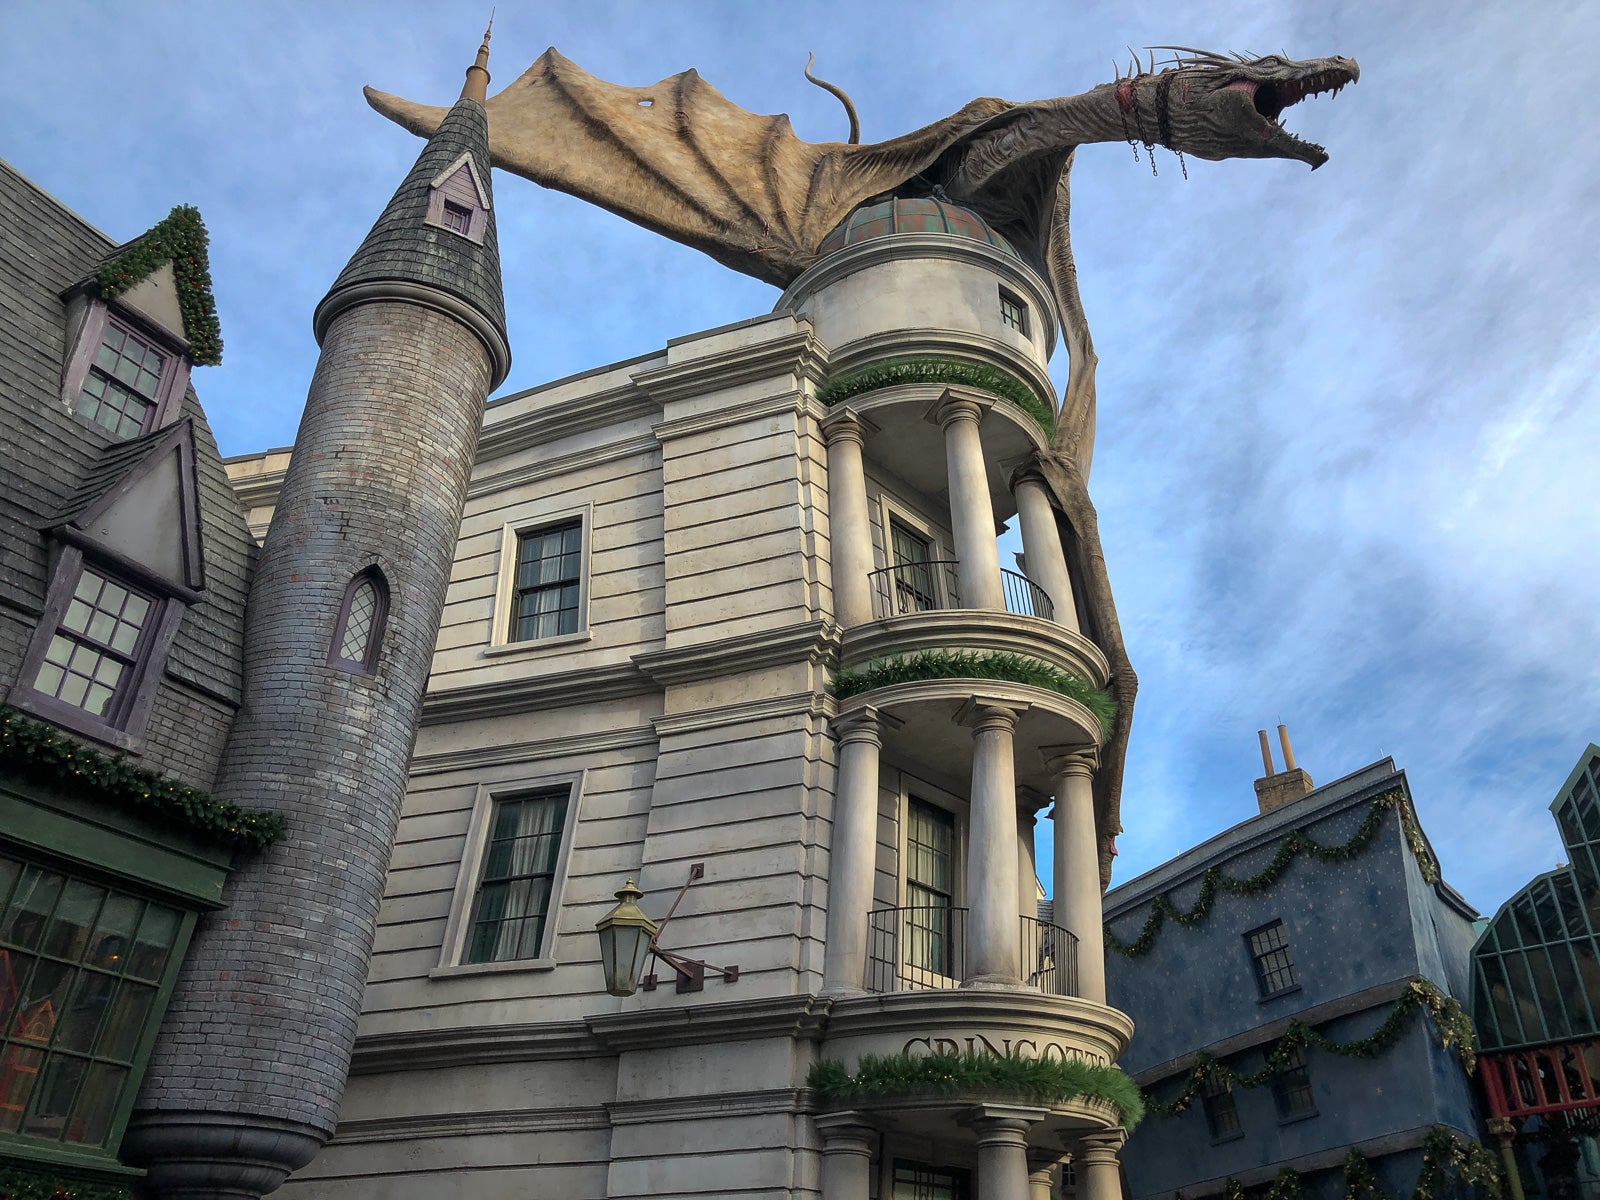 The Wizarding World of Harry Potter-Diagon Alley at Universal Orlando Resort